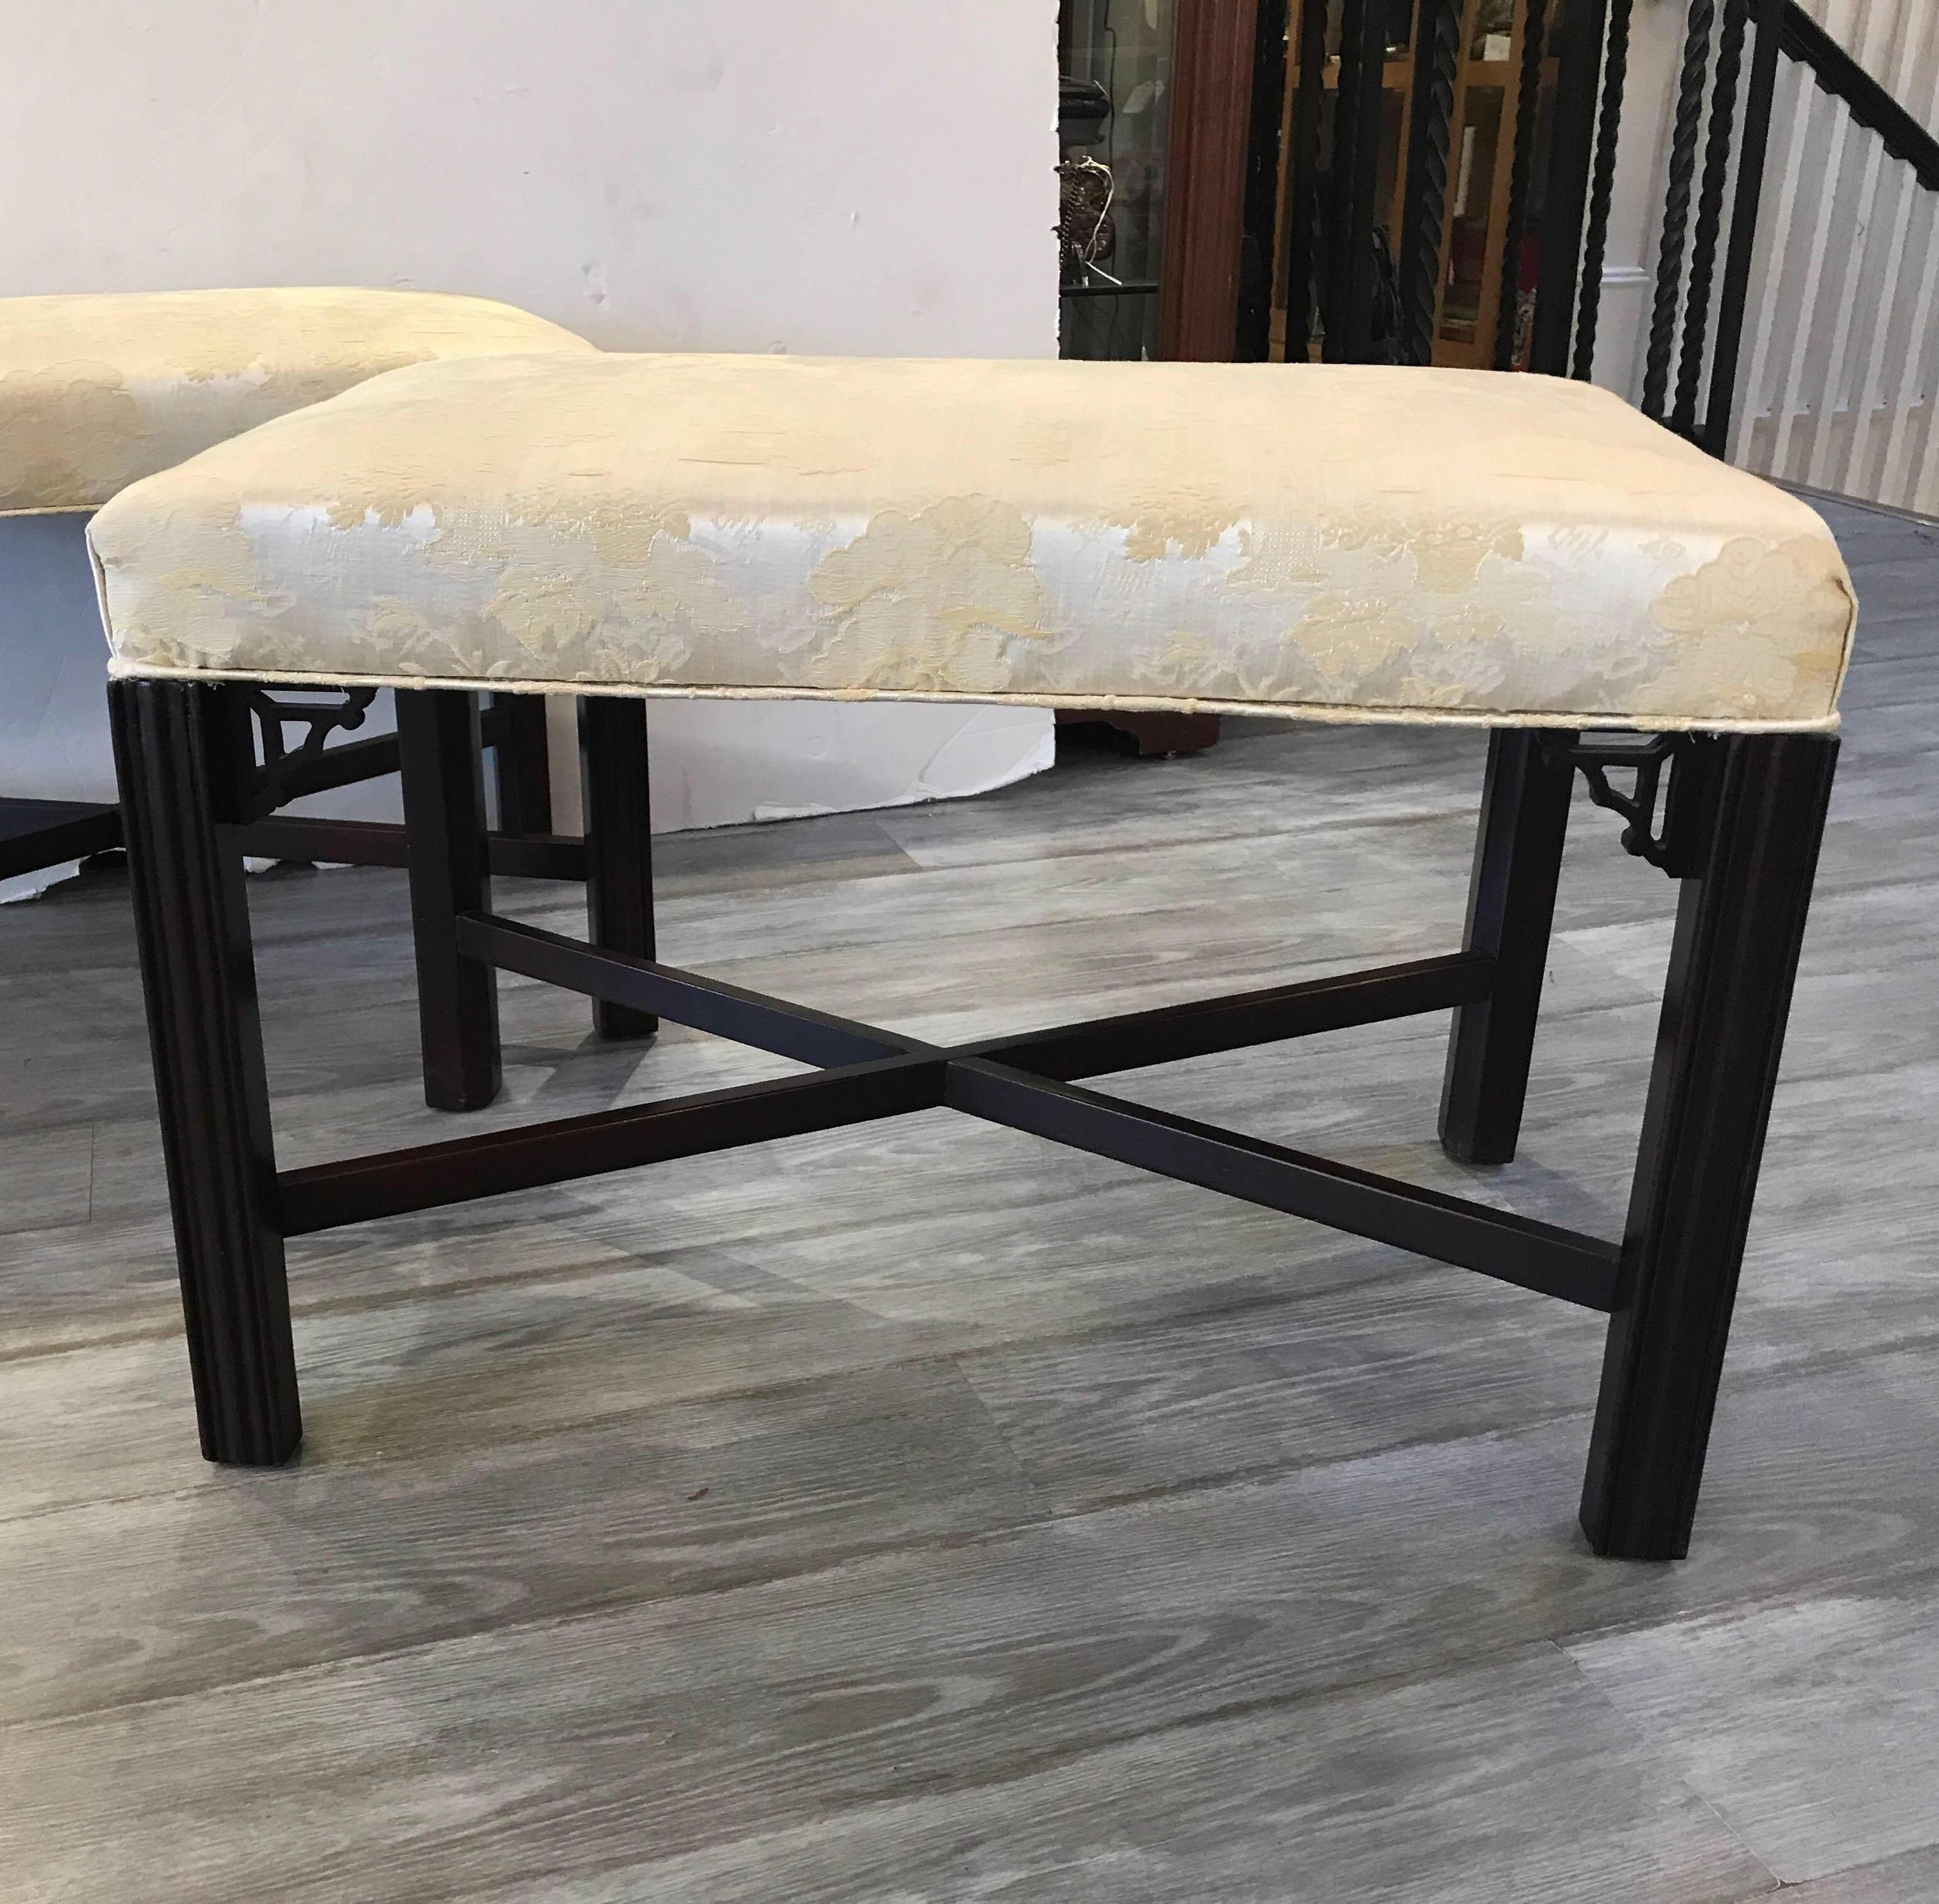 A pair of newly upholstered Chinese Chippendale mahogany benches. The classic straight leg with corner detail and X-stretcher. The fabric is a soft yellow chinoiserie damask.